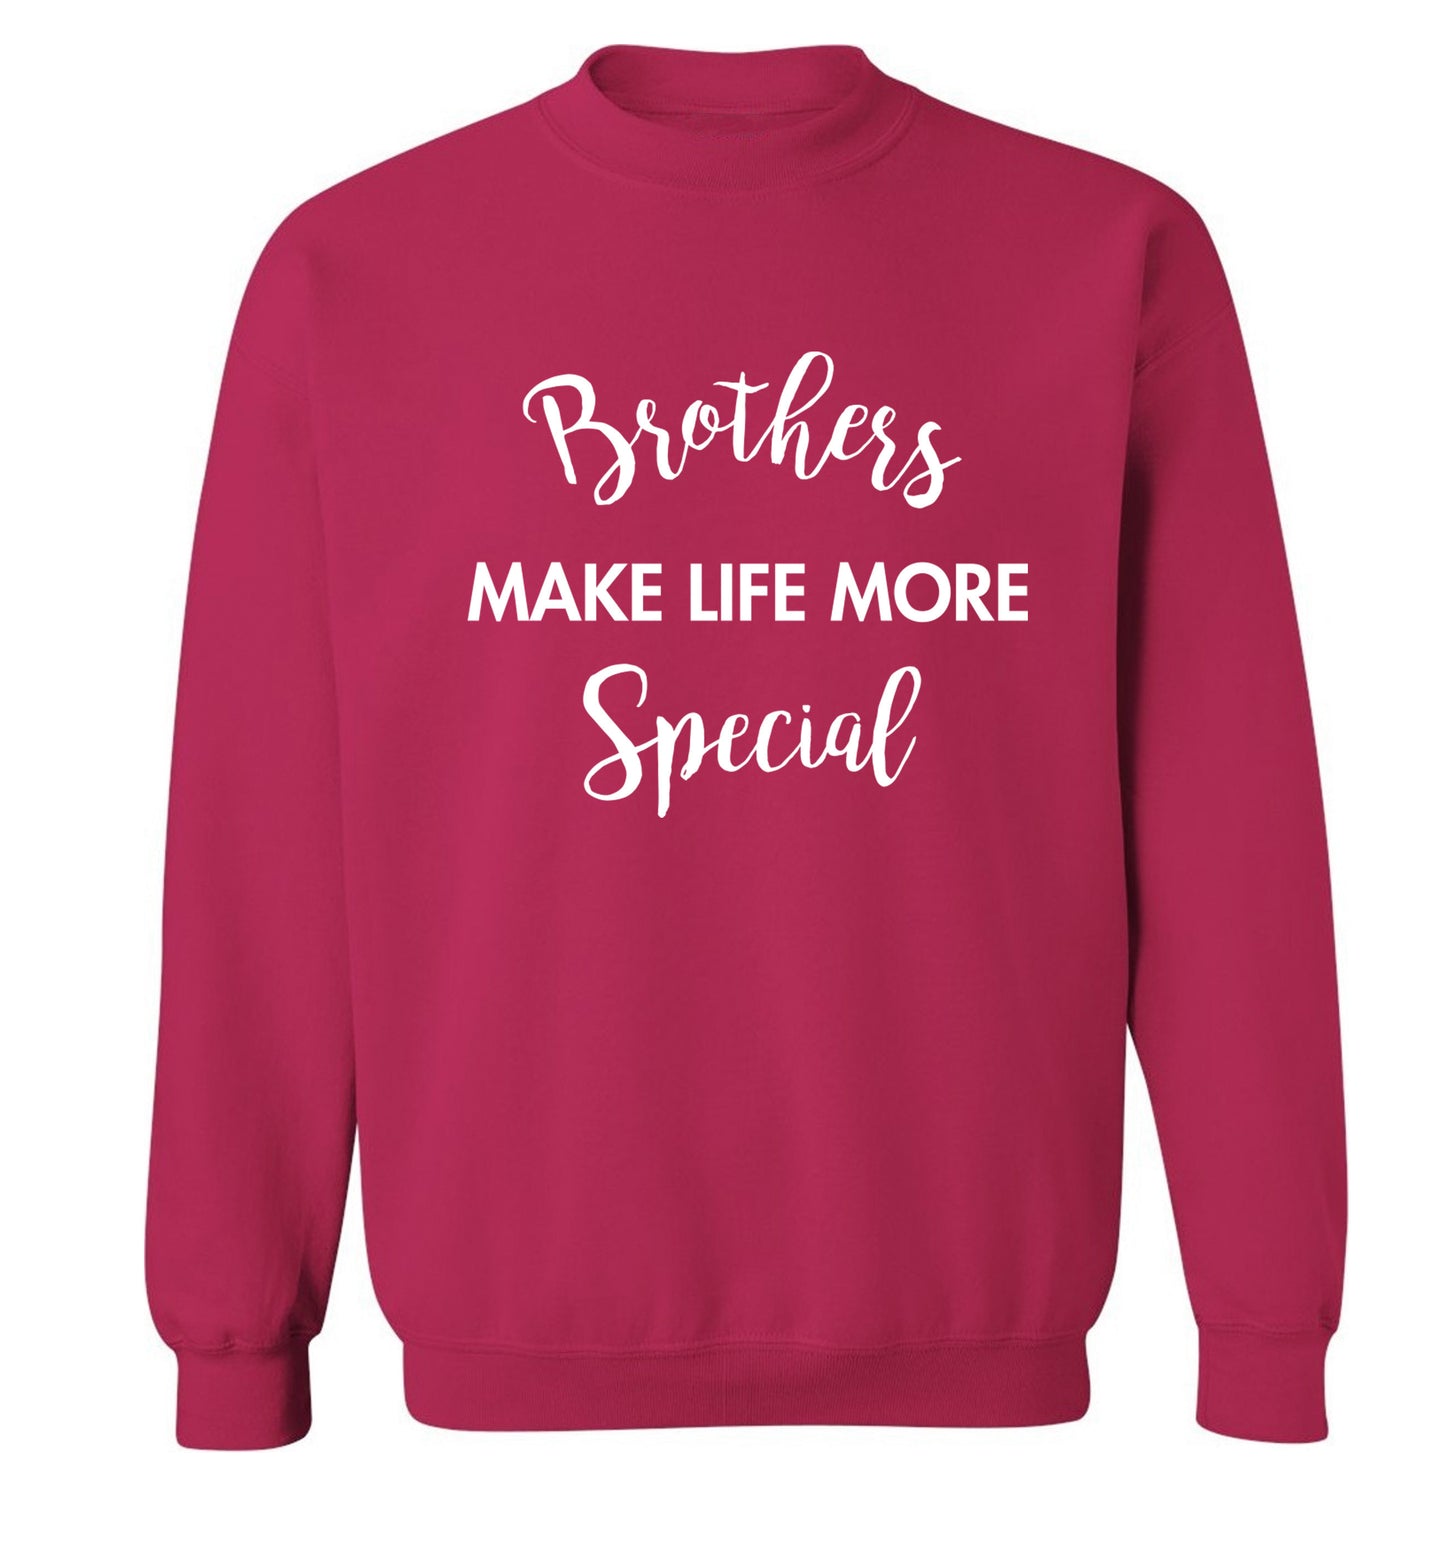 Brothers make life more special Adult's unisex pink Sweater 2XL